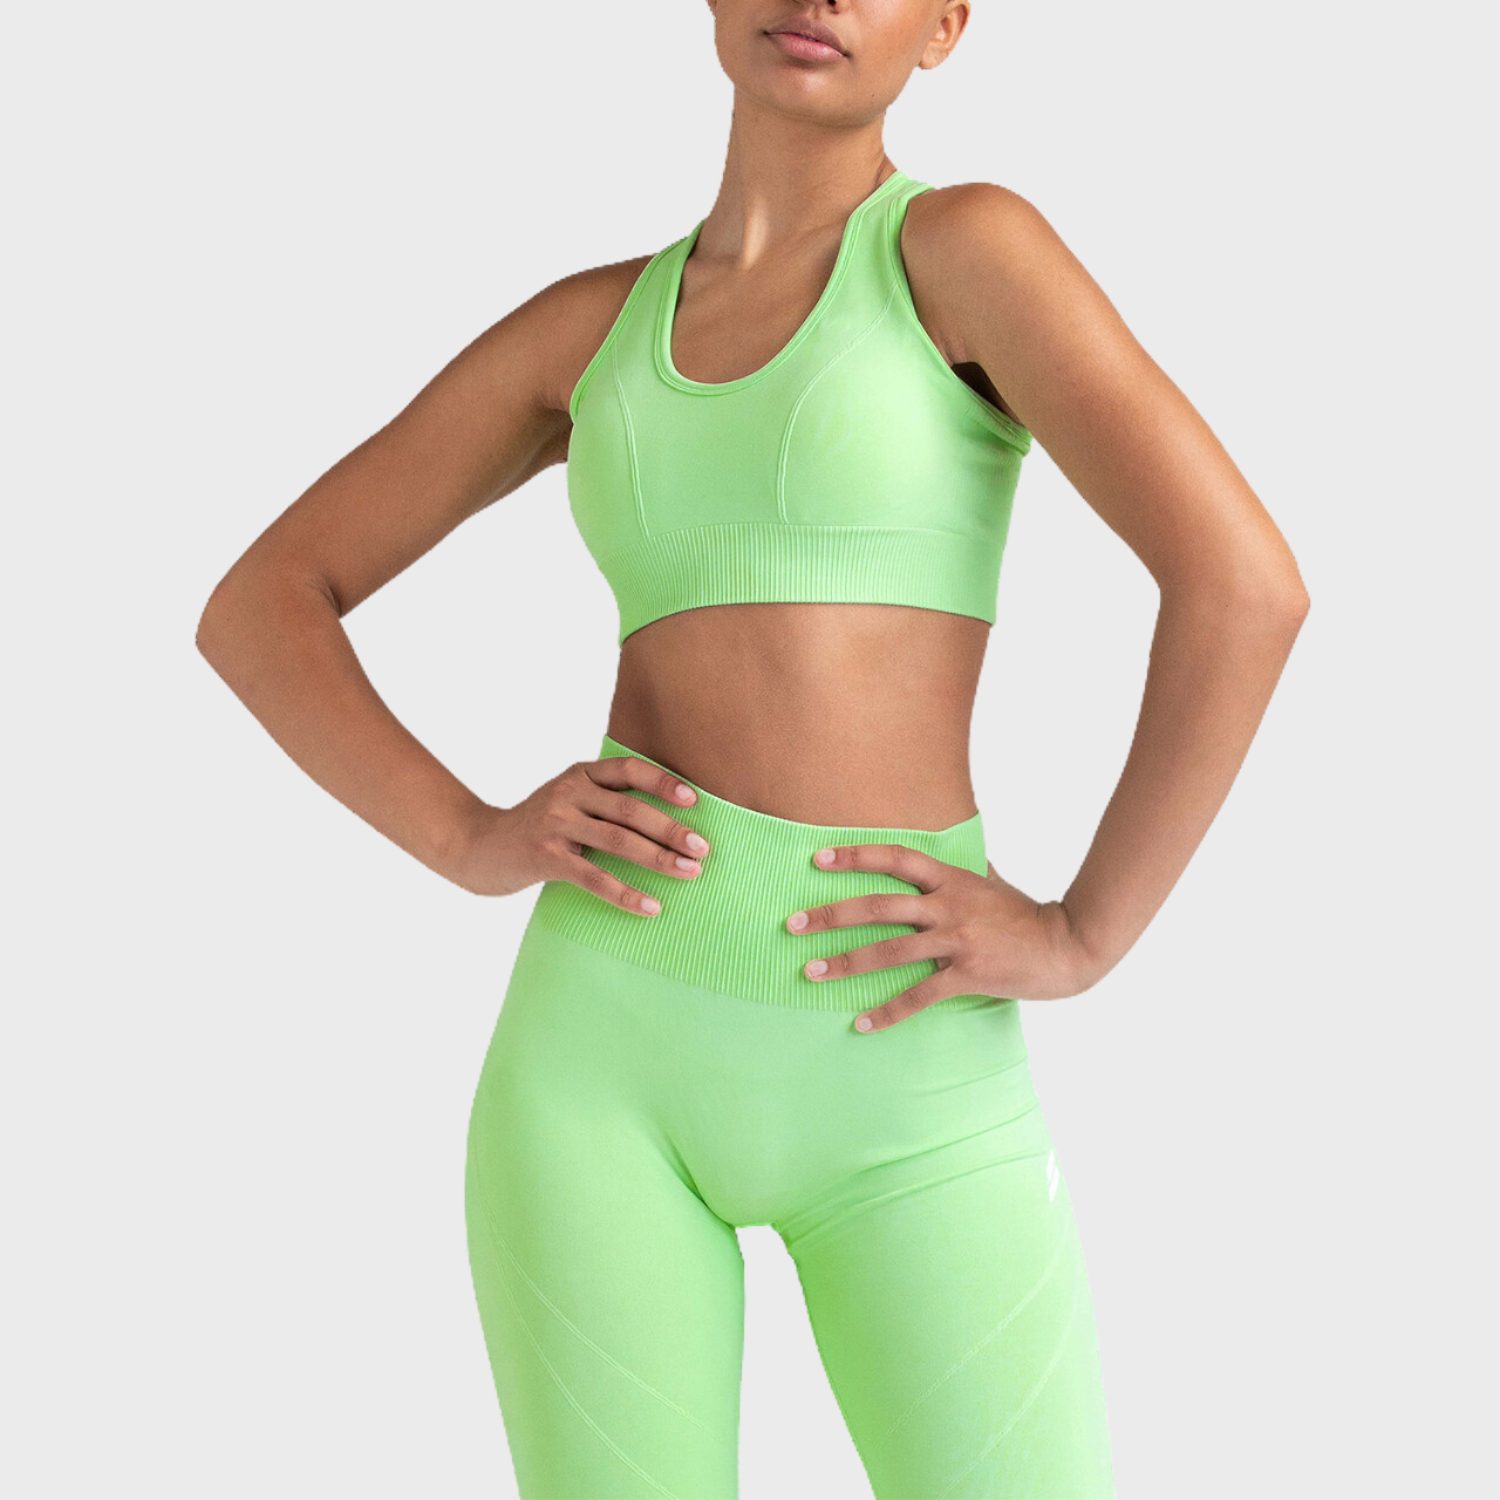 Green Gym Athletic Clothes